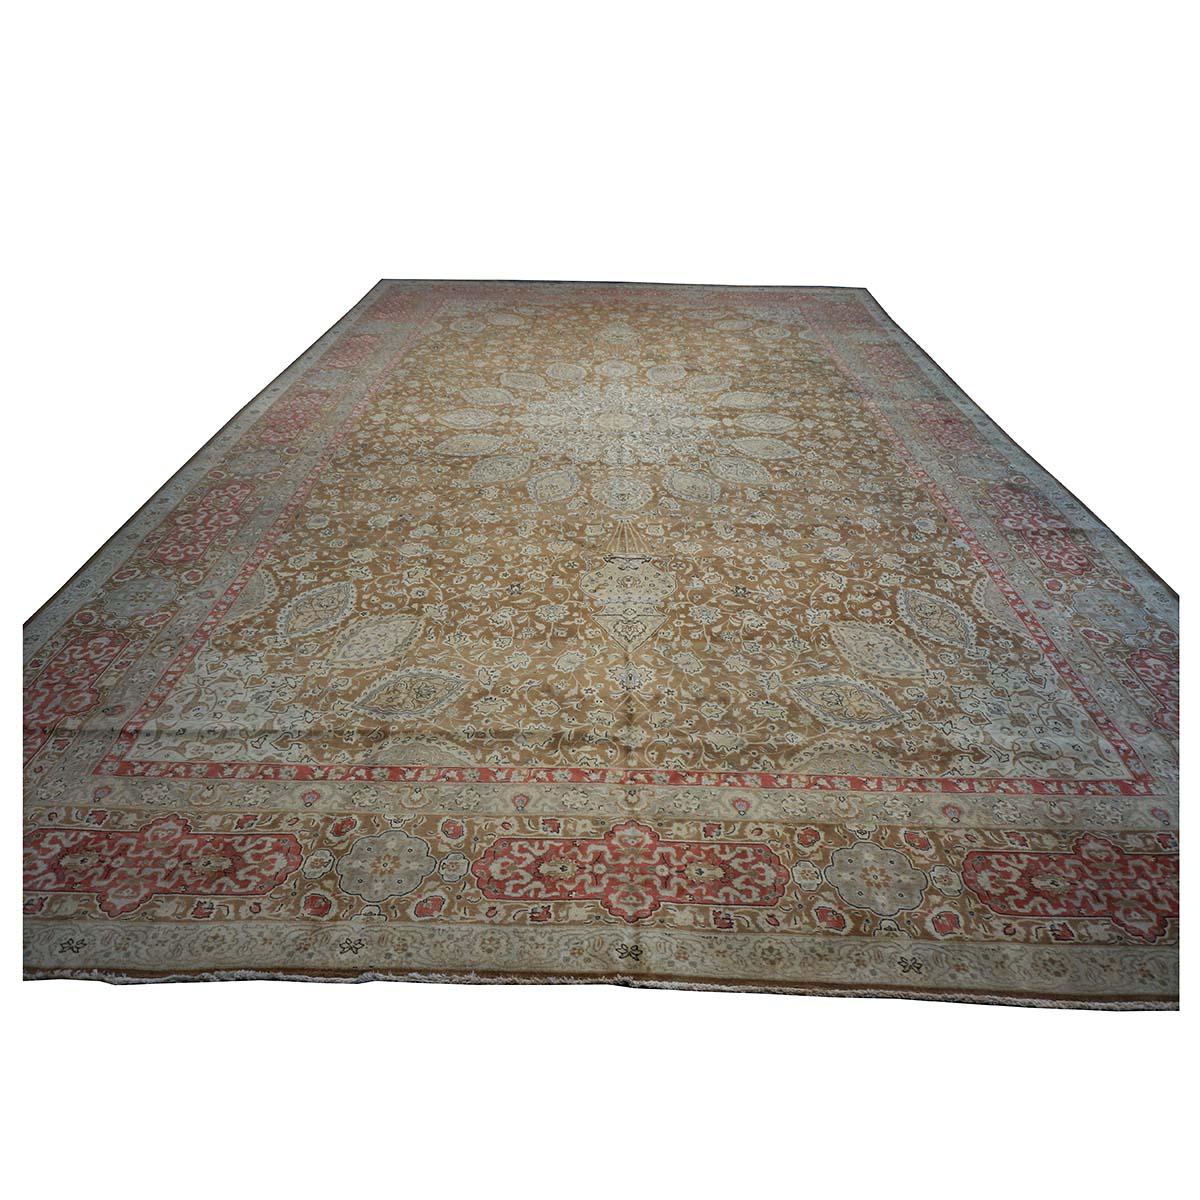 Wool Antique 1930s Persian Tabriz 13x20 Brown & Salmon Oversized Handmade Area Rug For Sale